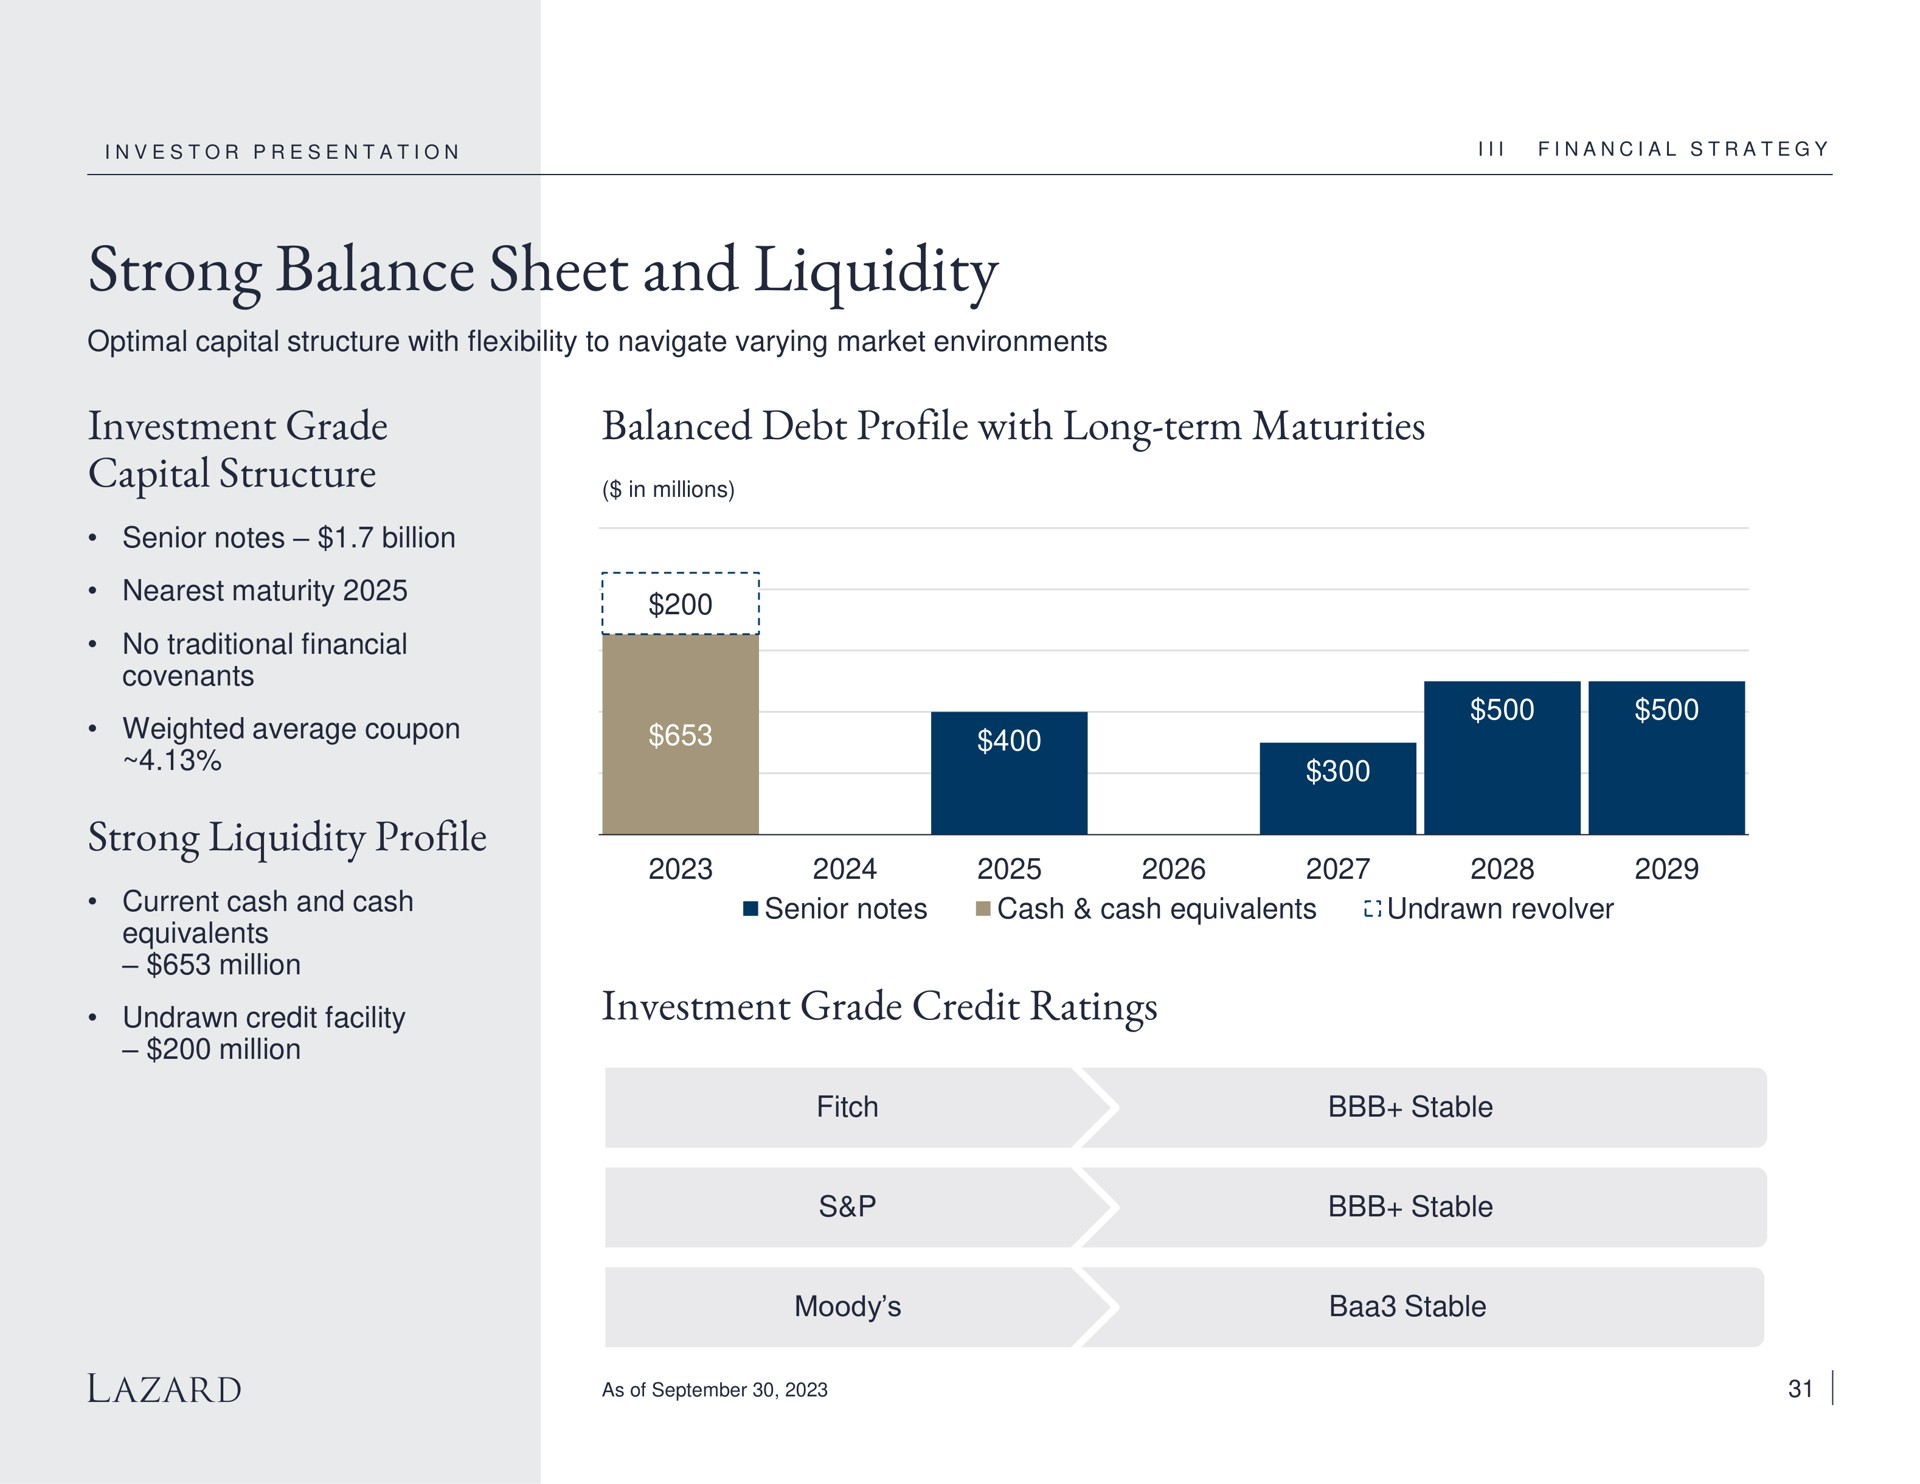 strong balance sheet and liquidity investment grade capital structure strong liquidity profile balanced debt profile with long term maturities investment grade credit ratings | Lazard